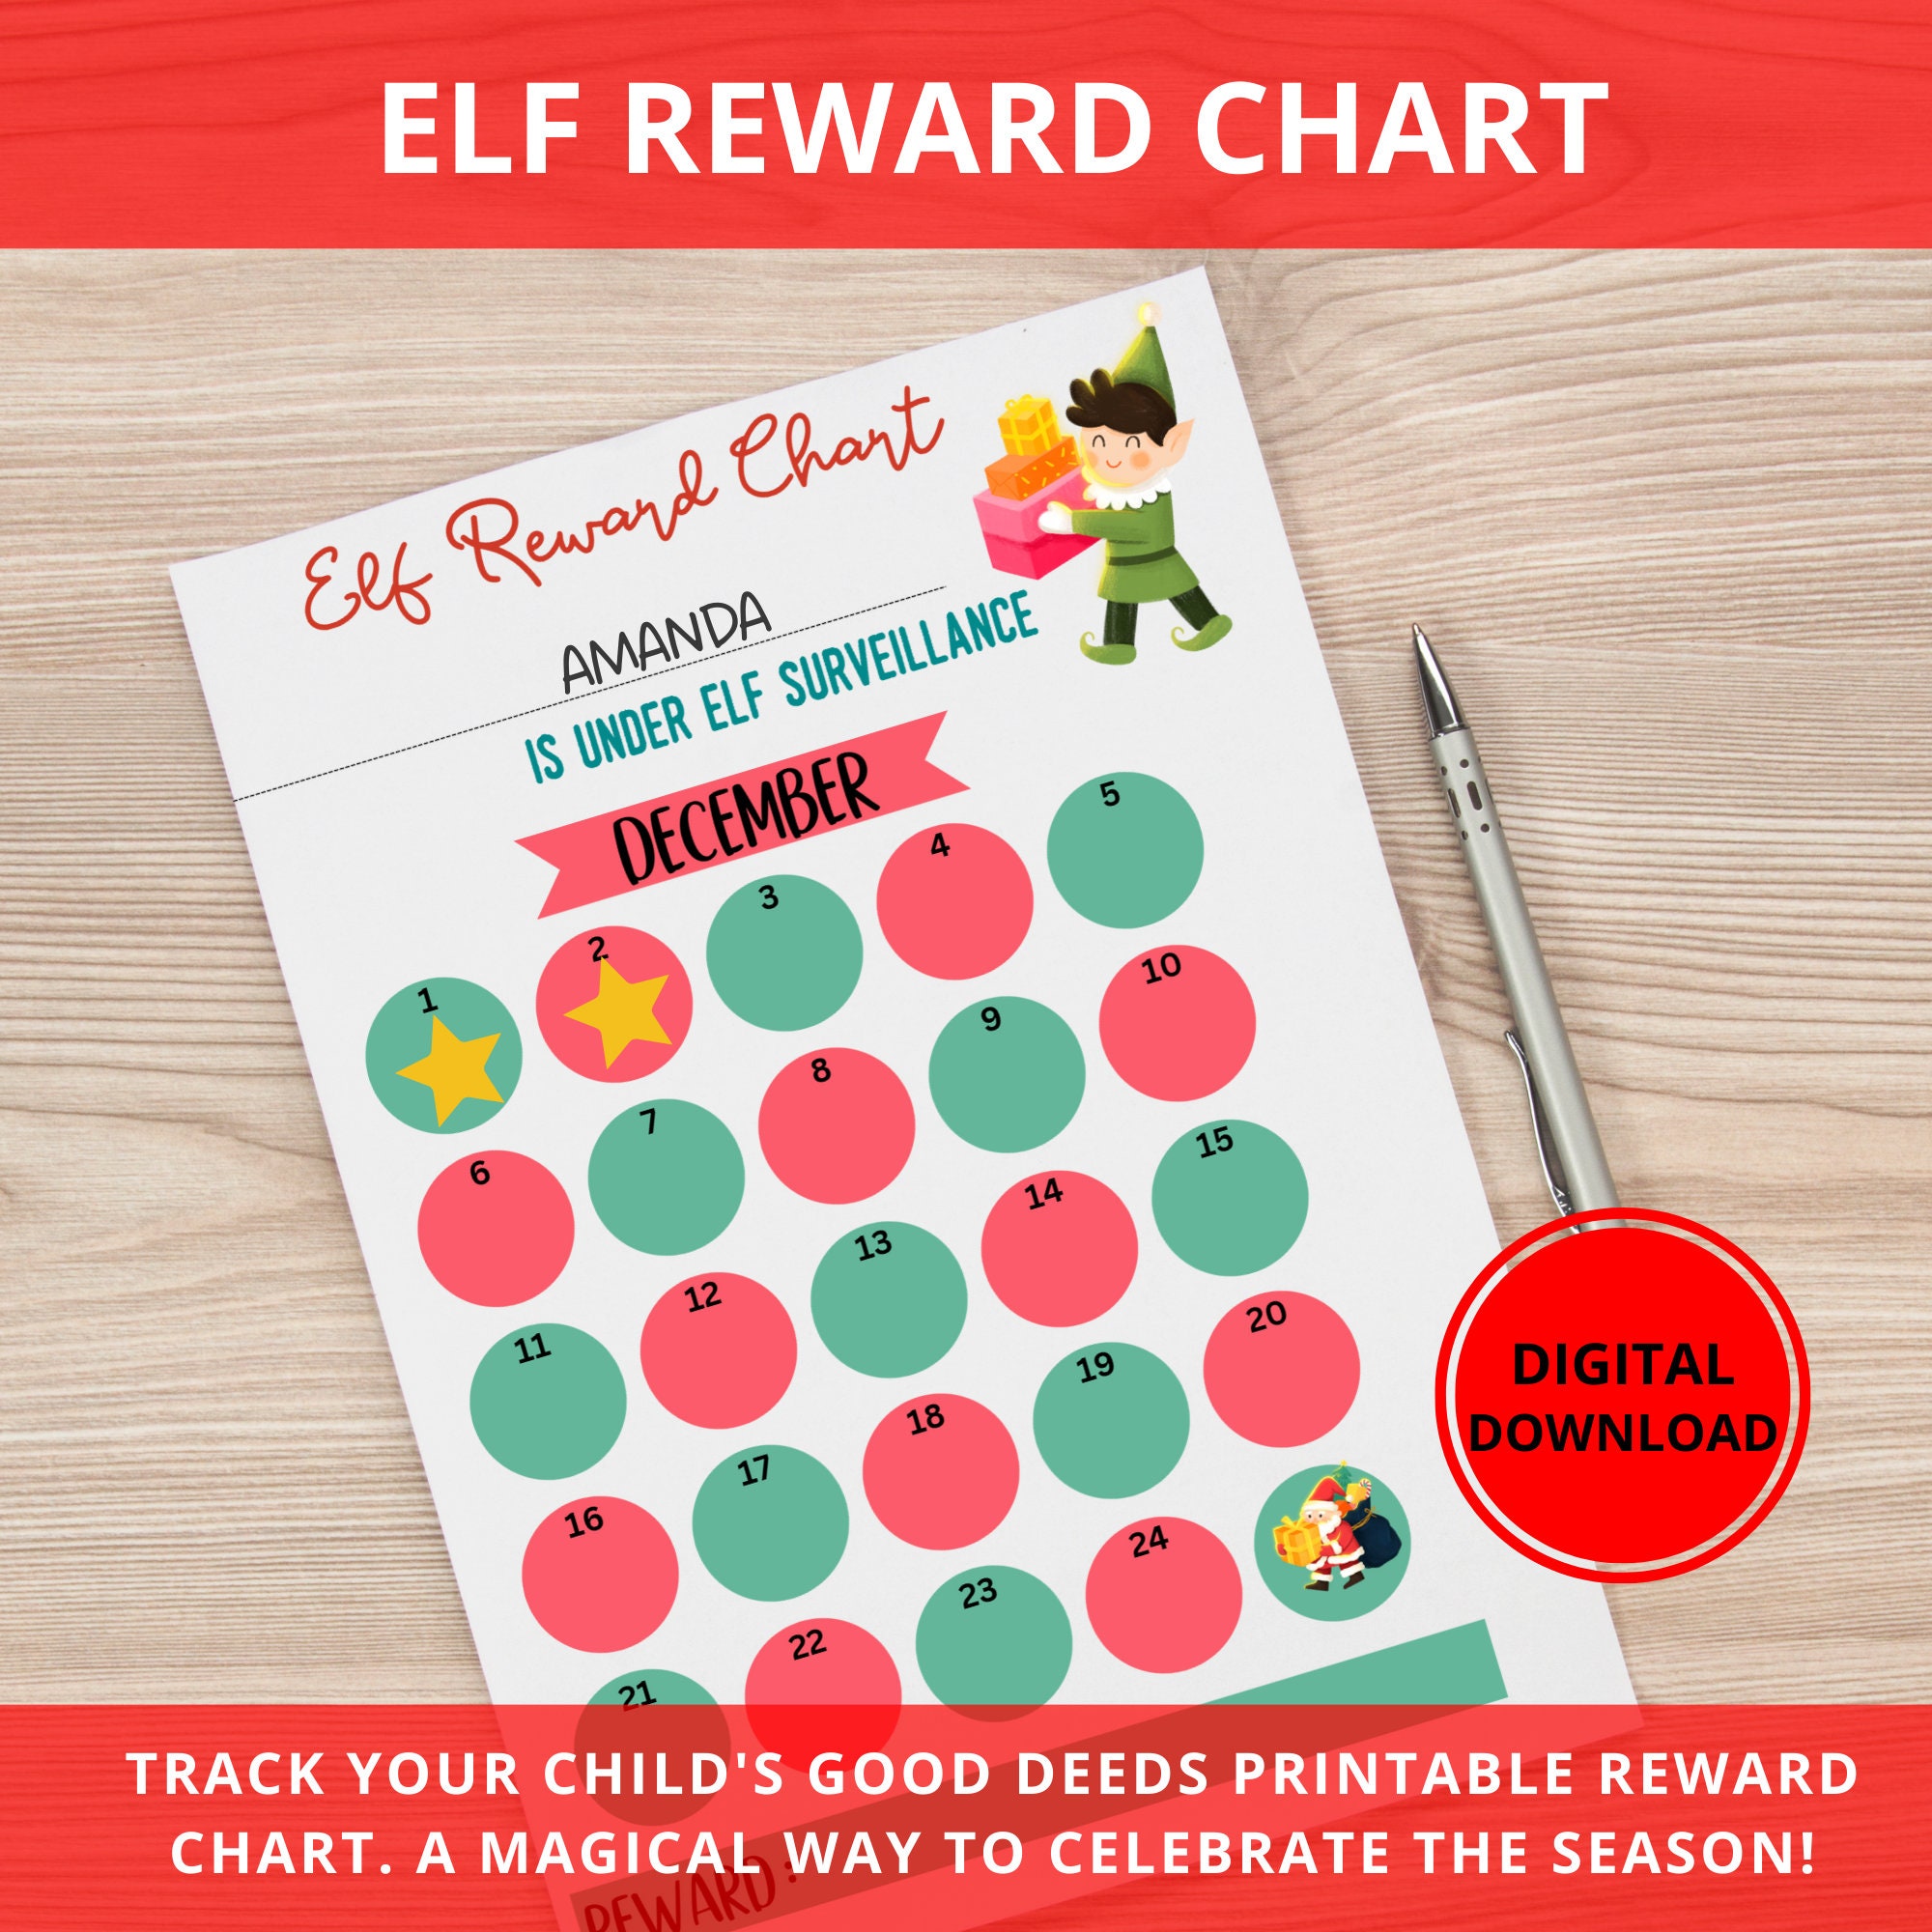 Adulting Stickers Digital Download Printable Reward Yourself to a Gold Star  Planner Stickers Birthday Printable Reward Stickers 